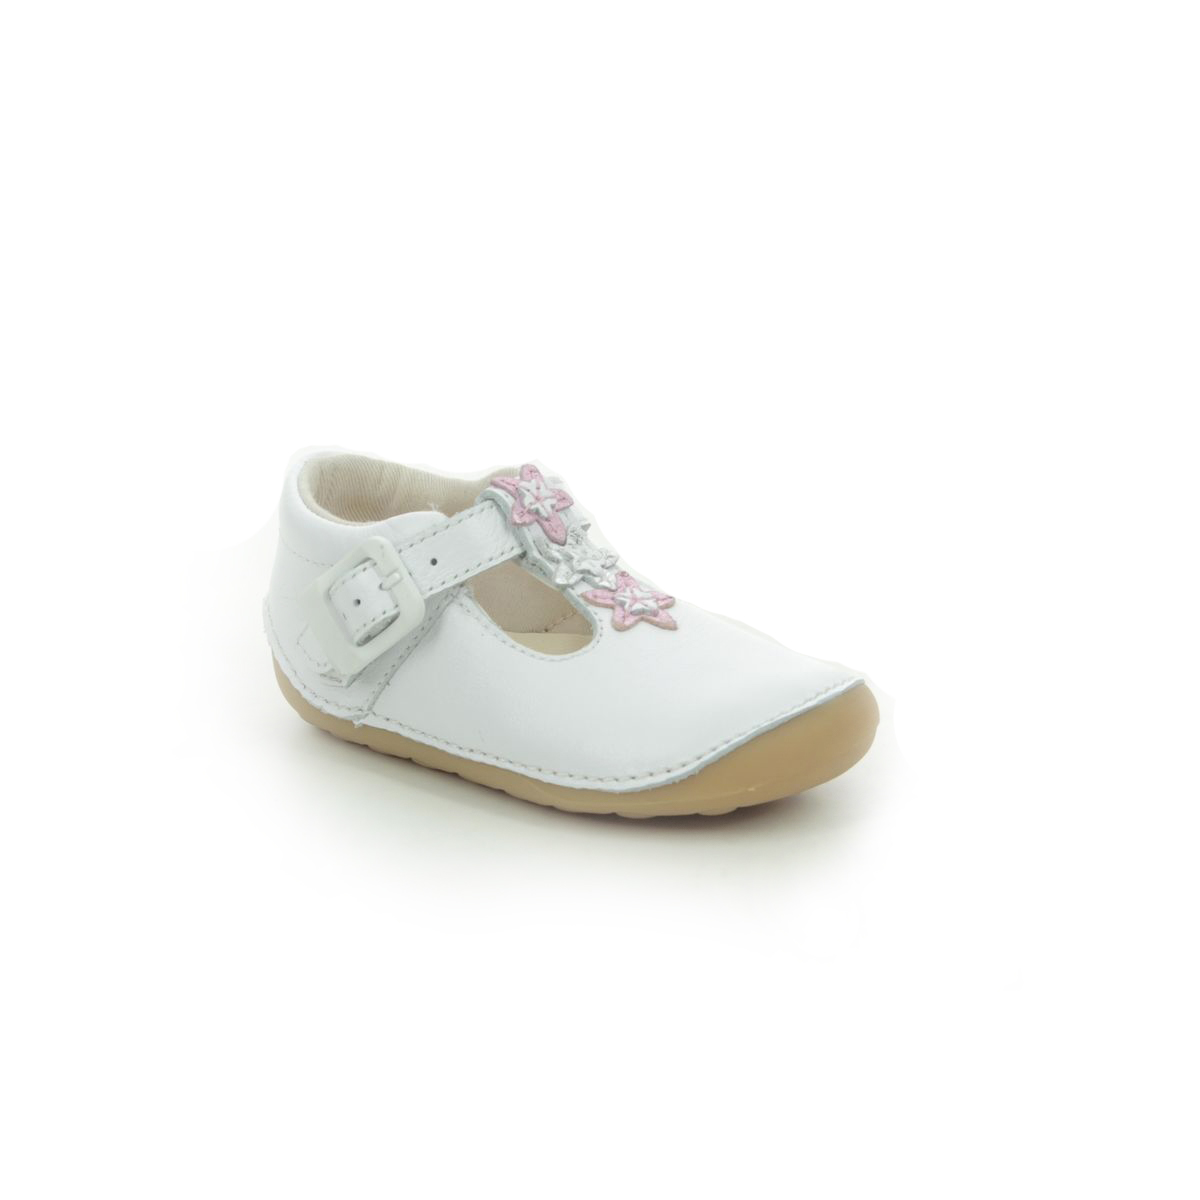 Clarks Tiny Flower T WHITE LEATHER Kids girls first and baby shoes 5763-56F in a Plain Leather in Size 5